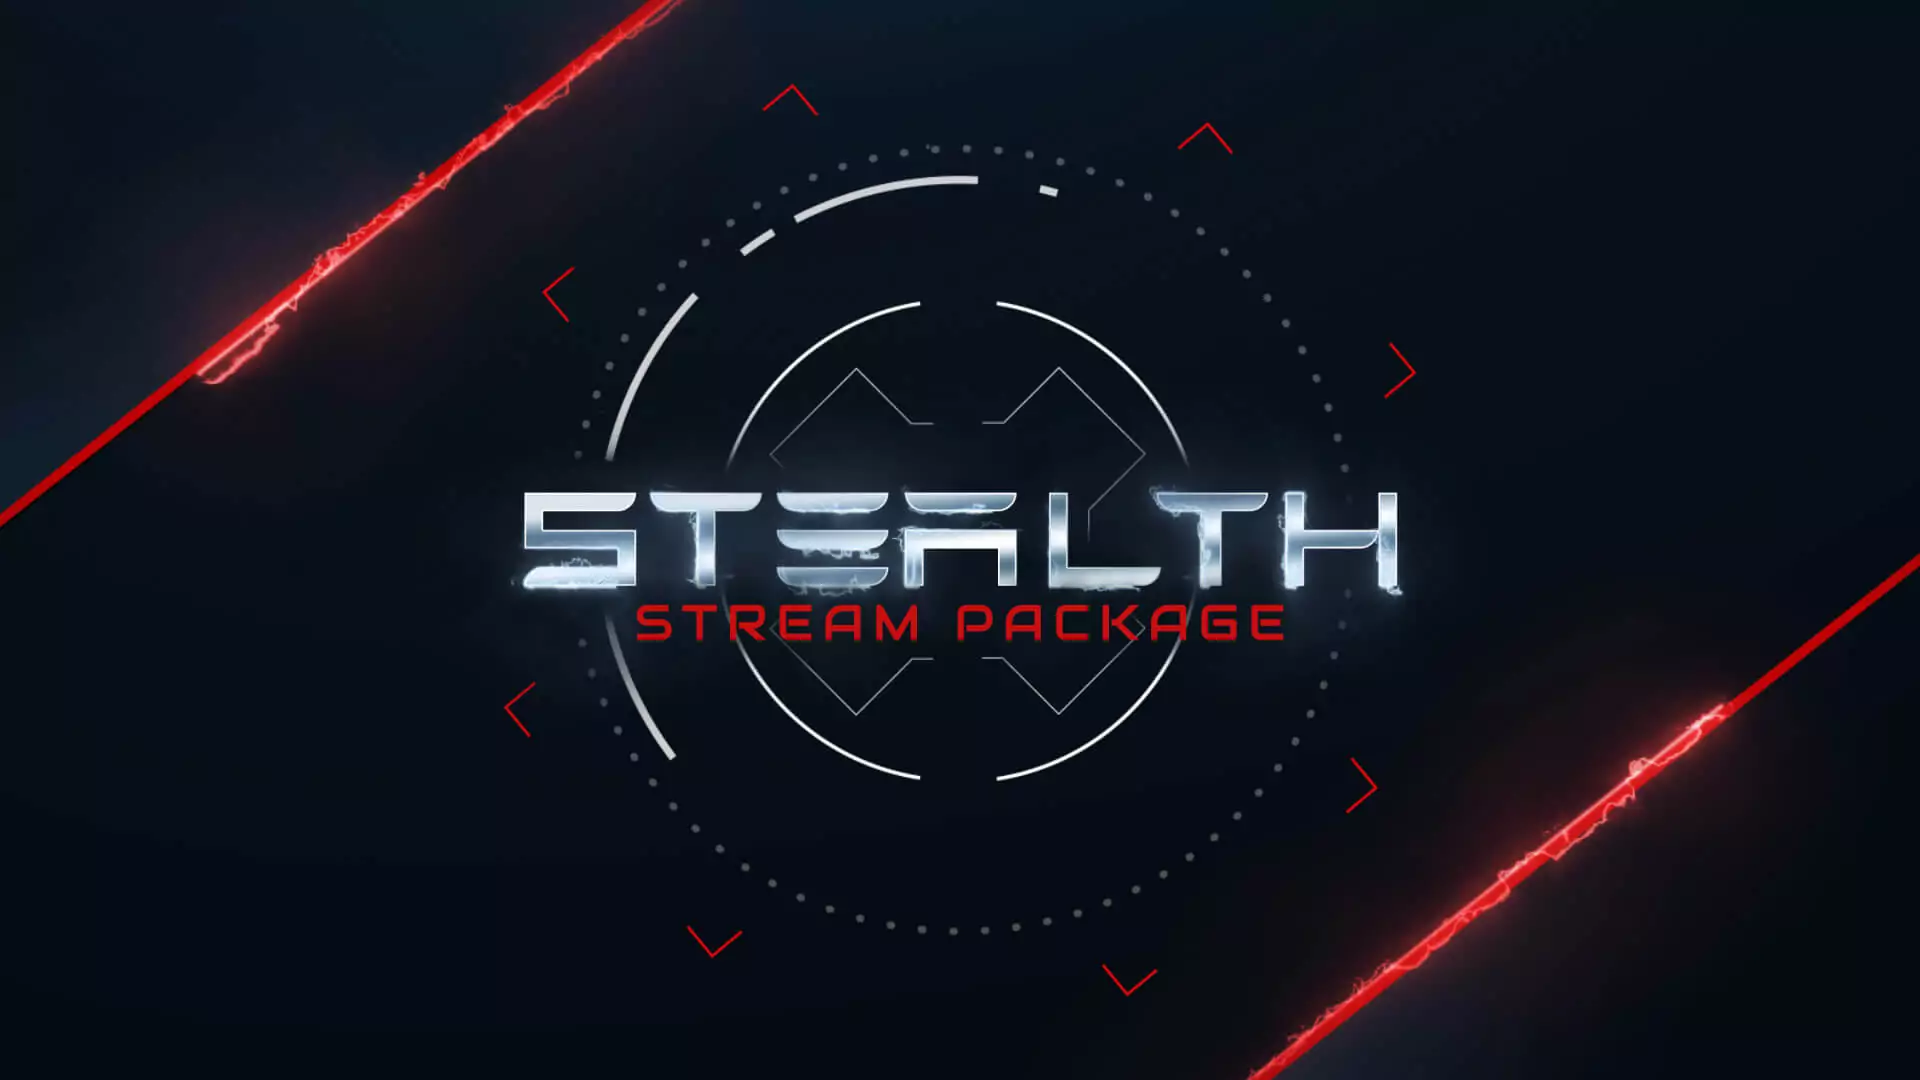 Stealth - Stream Package - Main Image